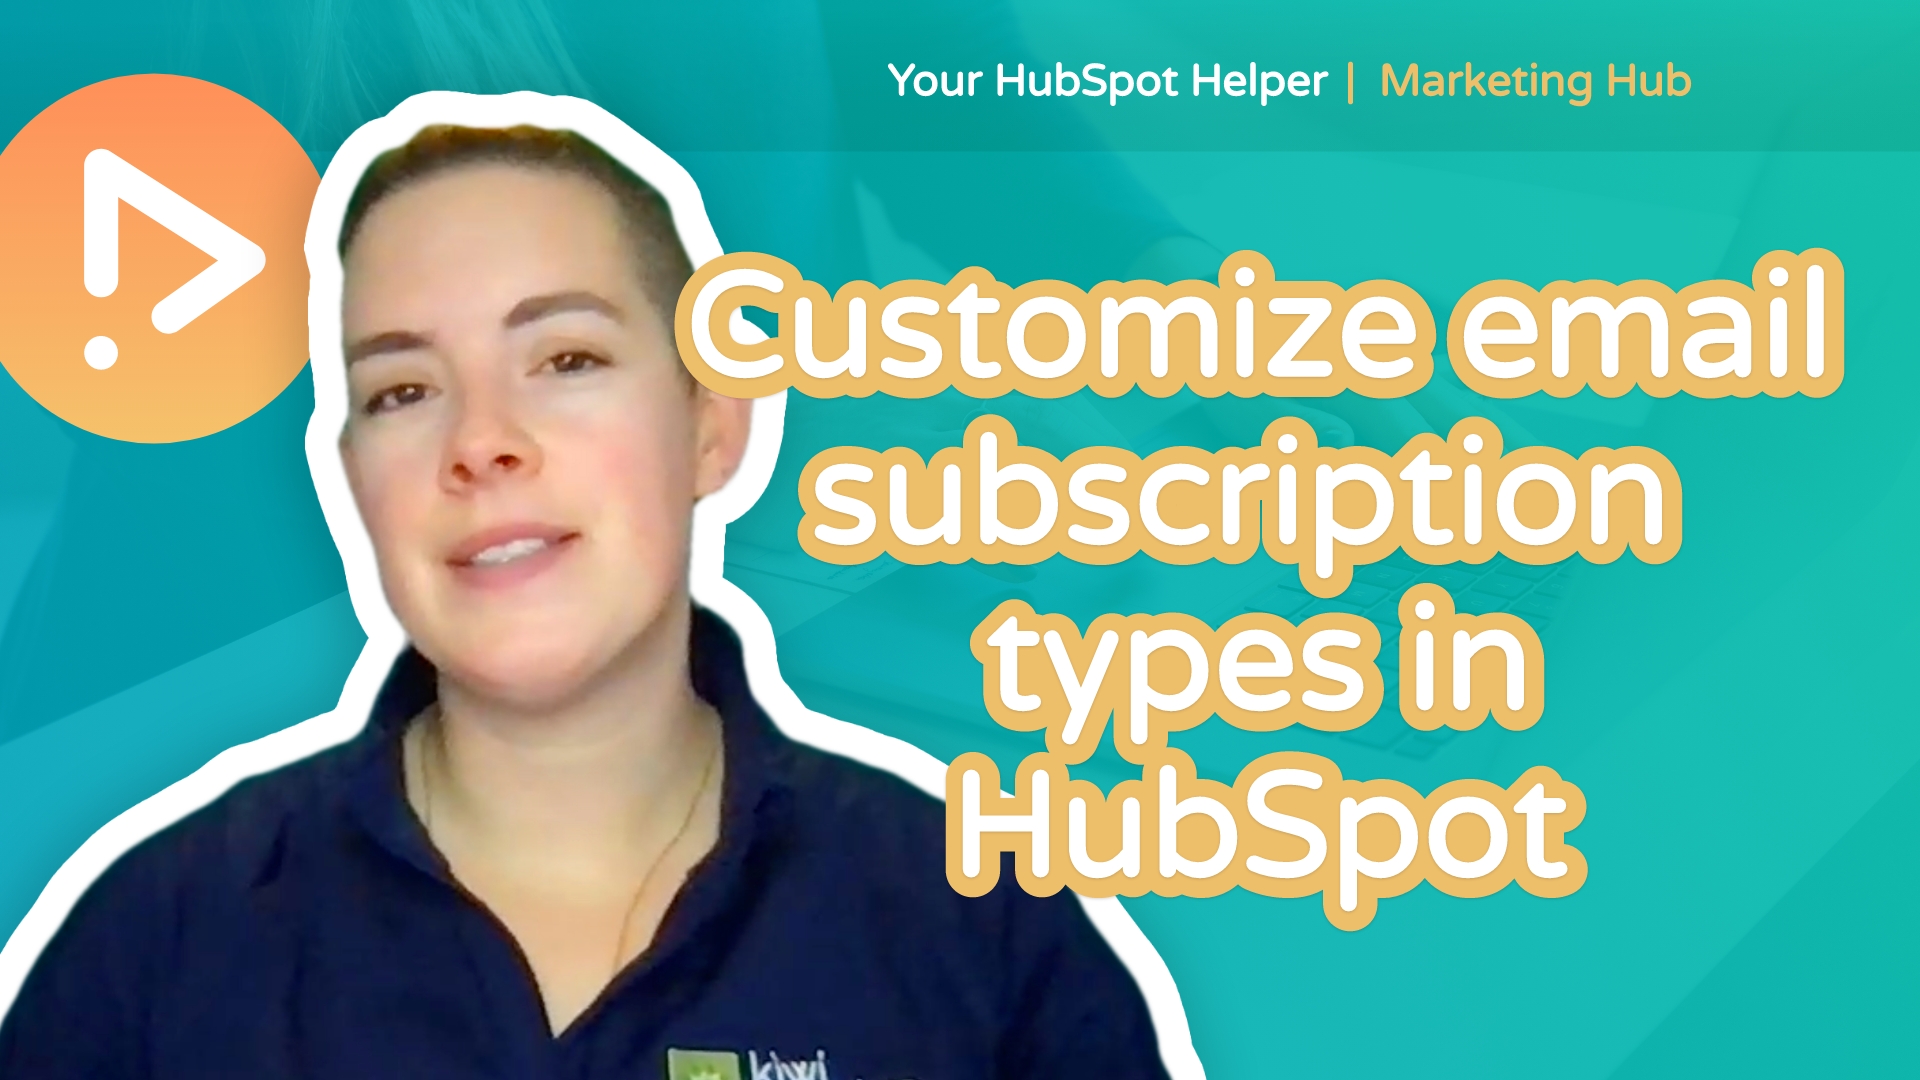 How to customize email subscription types in HubSpot